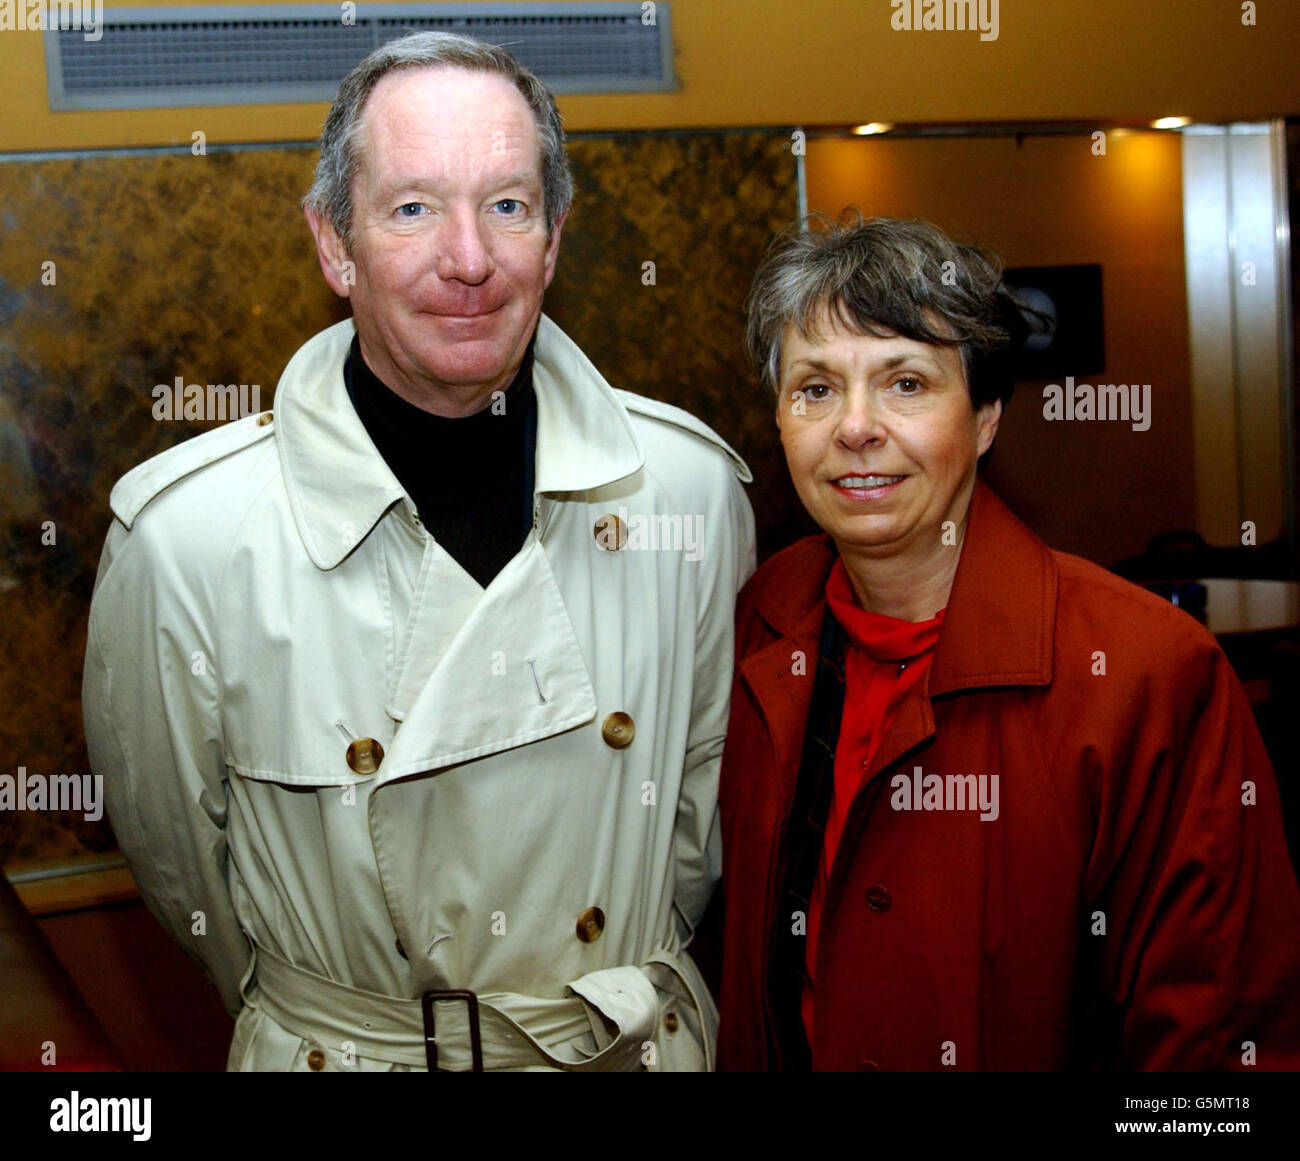 Television newsreader Michael Buerk and his wife Christine arriving at the Curzon Soho cinema in London's Shaftesbury Avenue, for the gala screening of Bloody Sunday. * ... which tells the story of the 1972 killing by British Soldiers of 13 civilians during a civil rights march in the city. Stock Photo